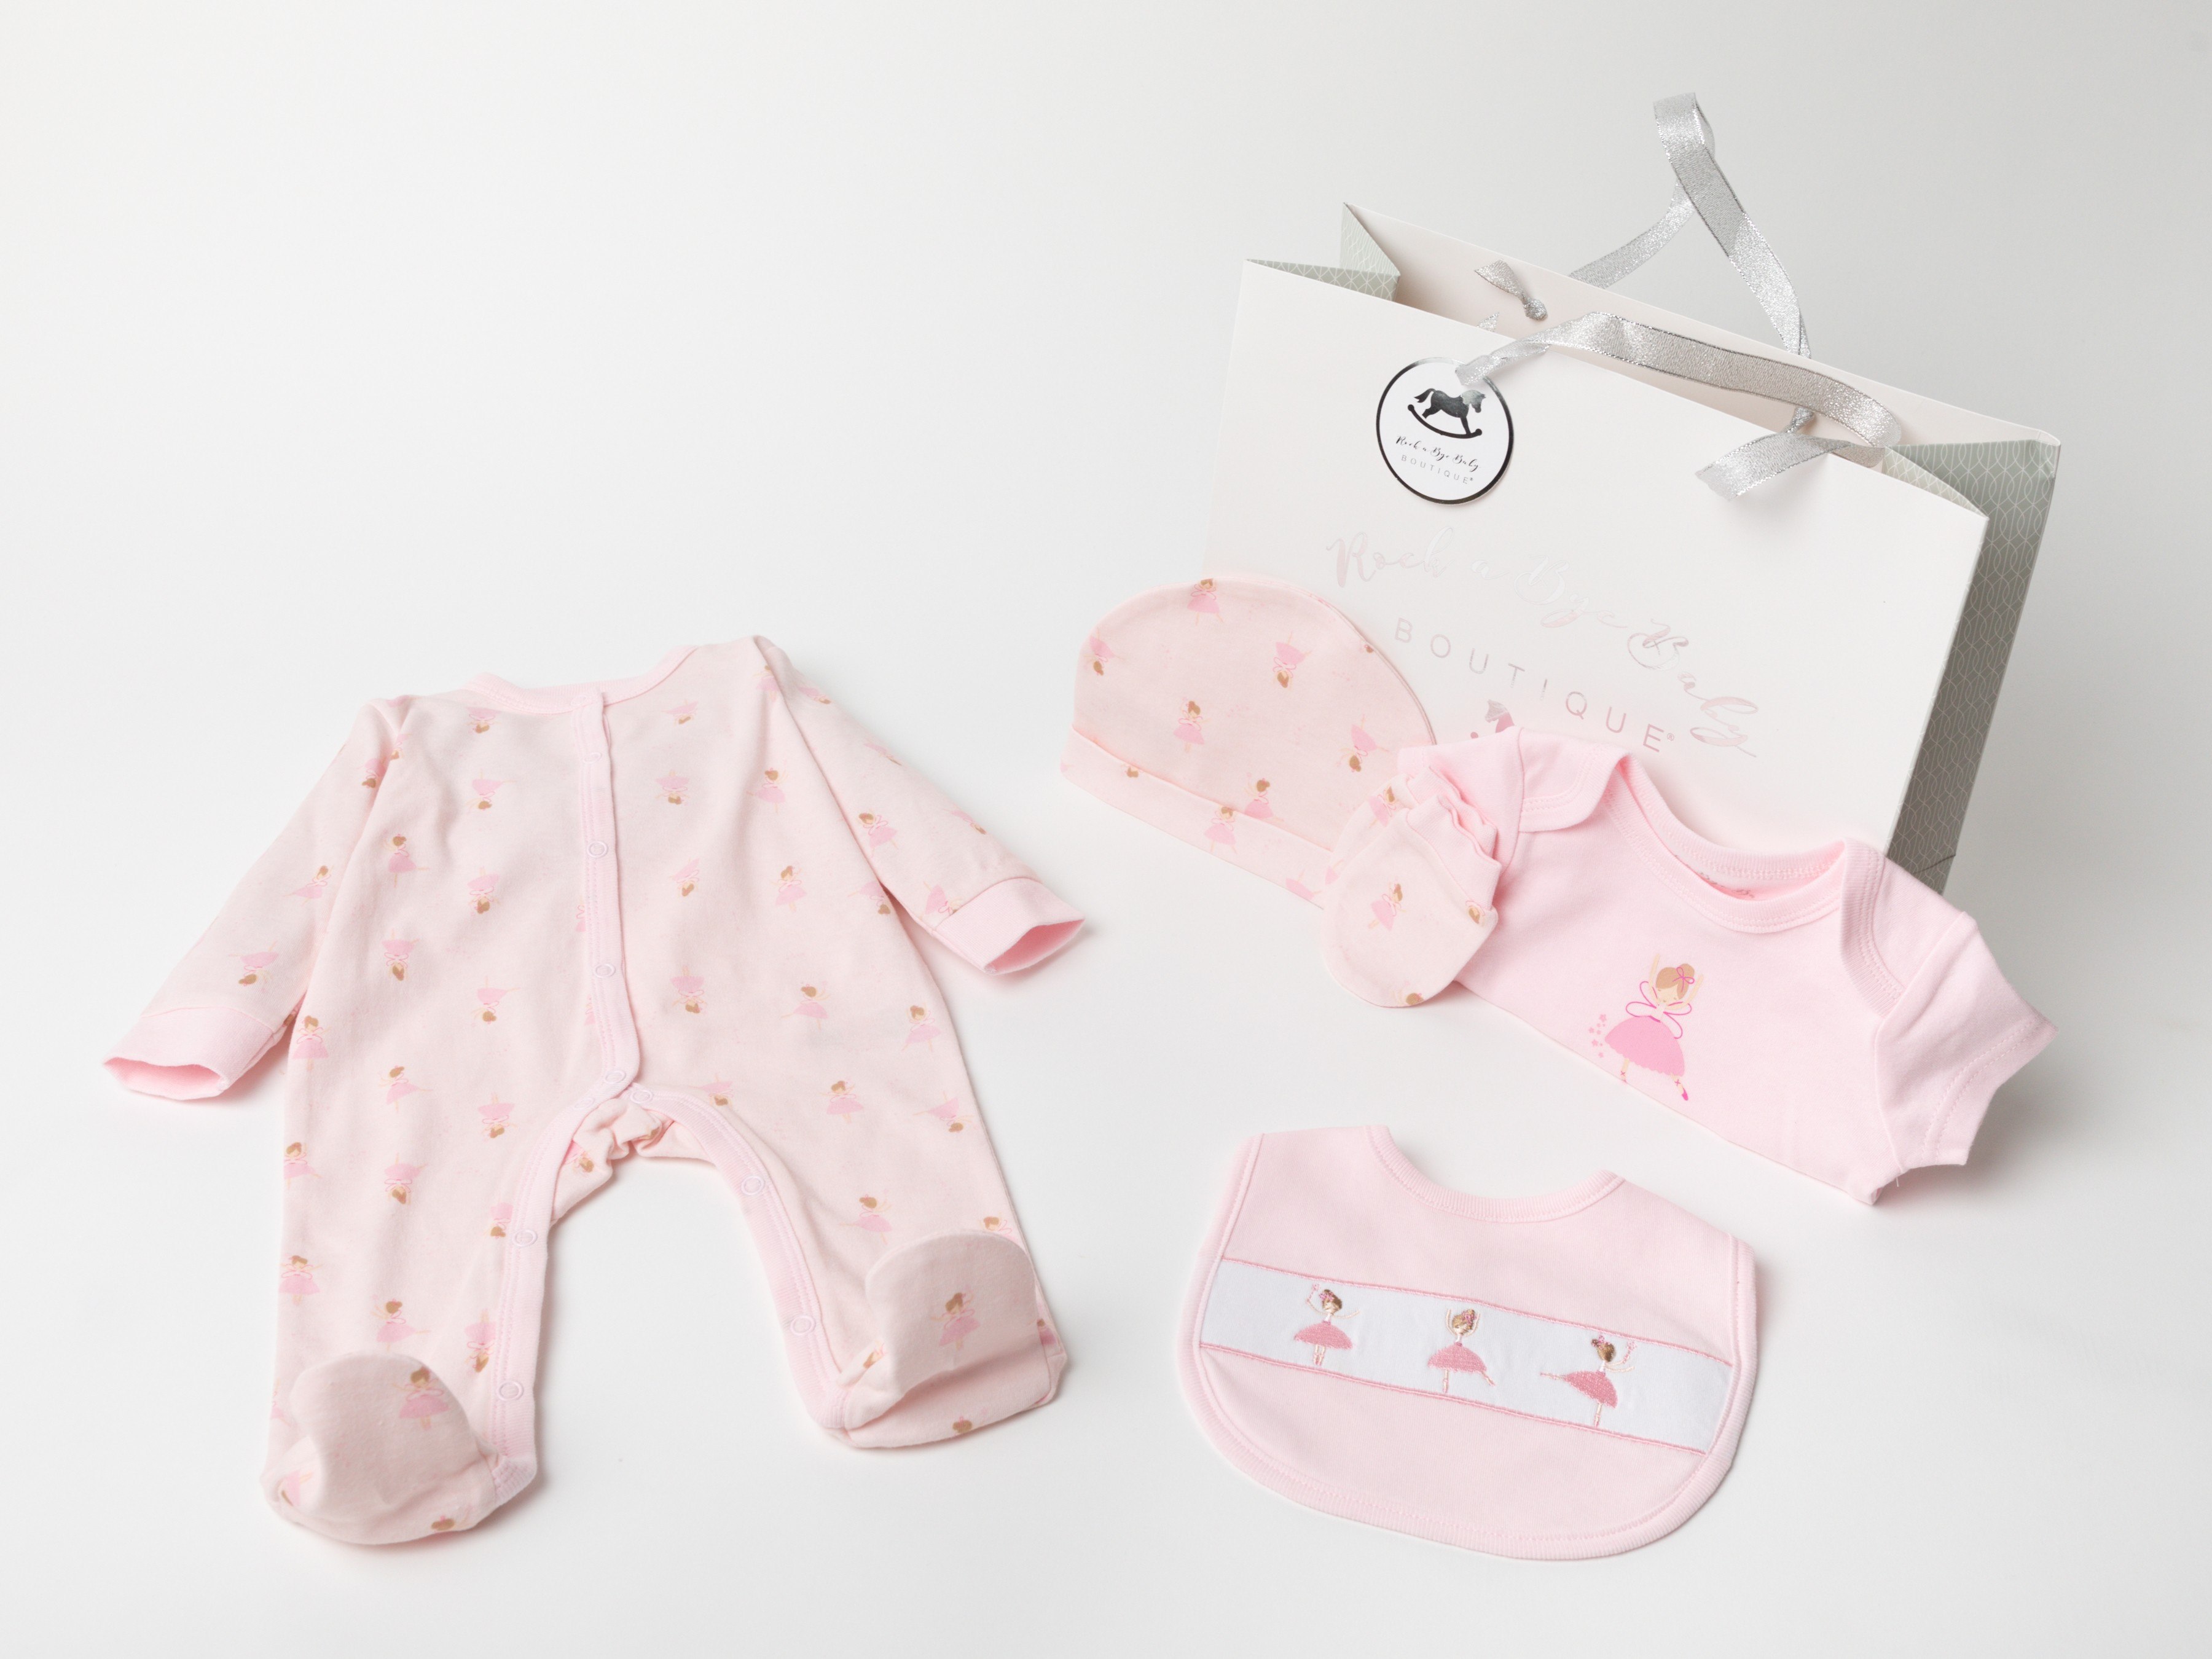 Rock a Bye Baby Boutique 'Balerina'  Baby Girls 5 Piece Set PACK OF 4